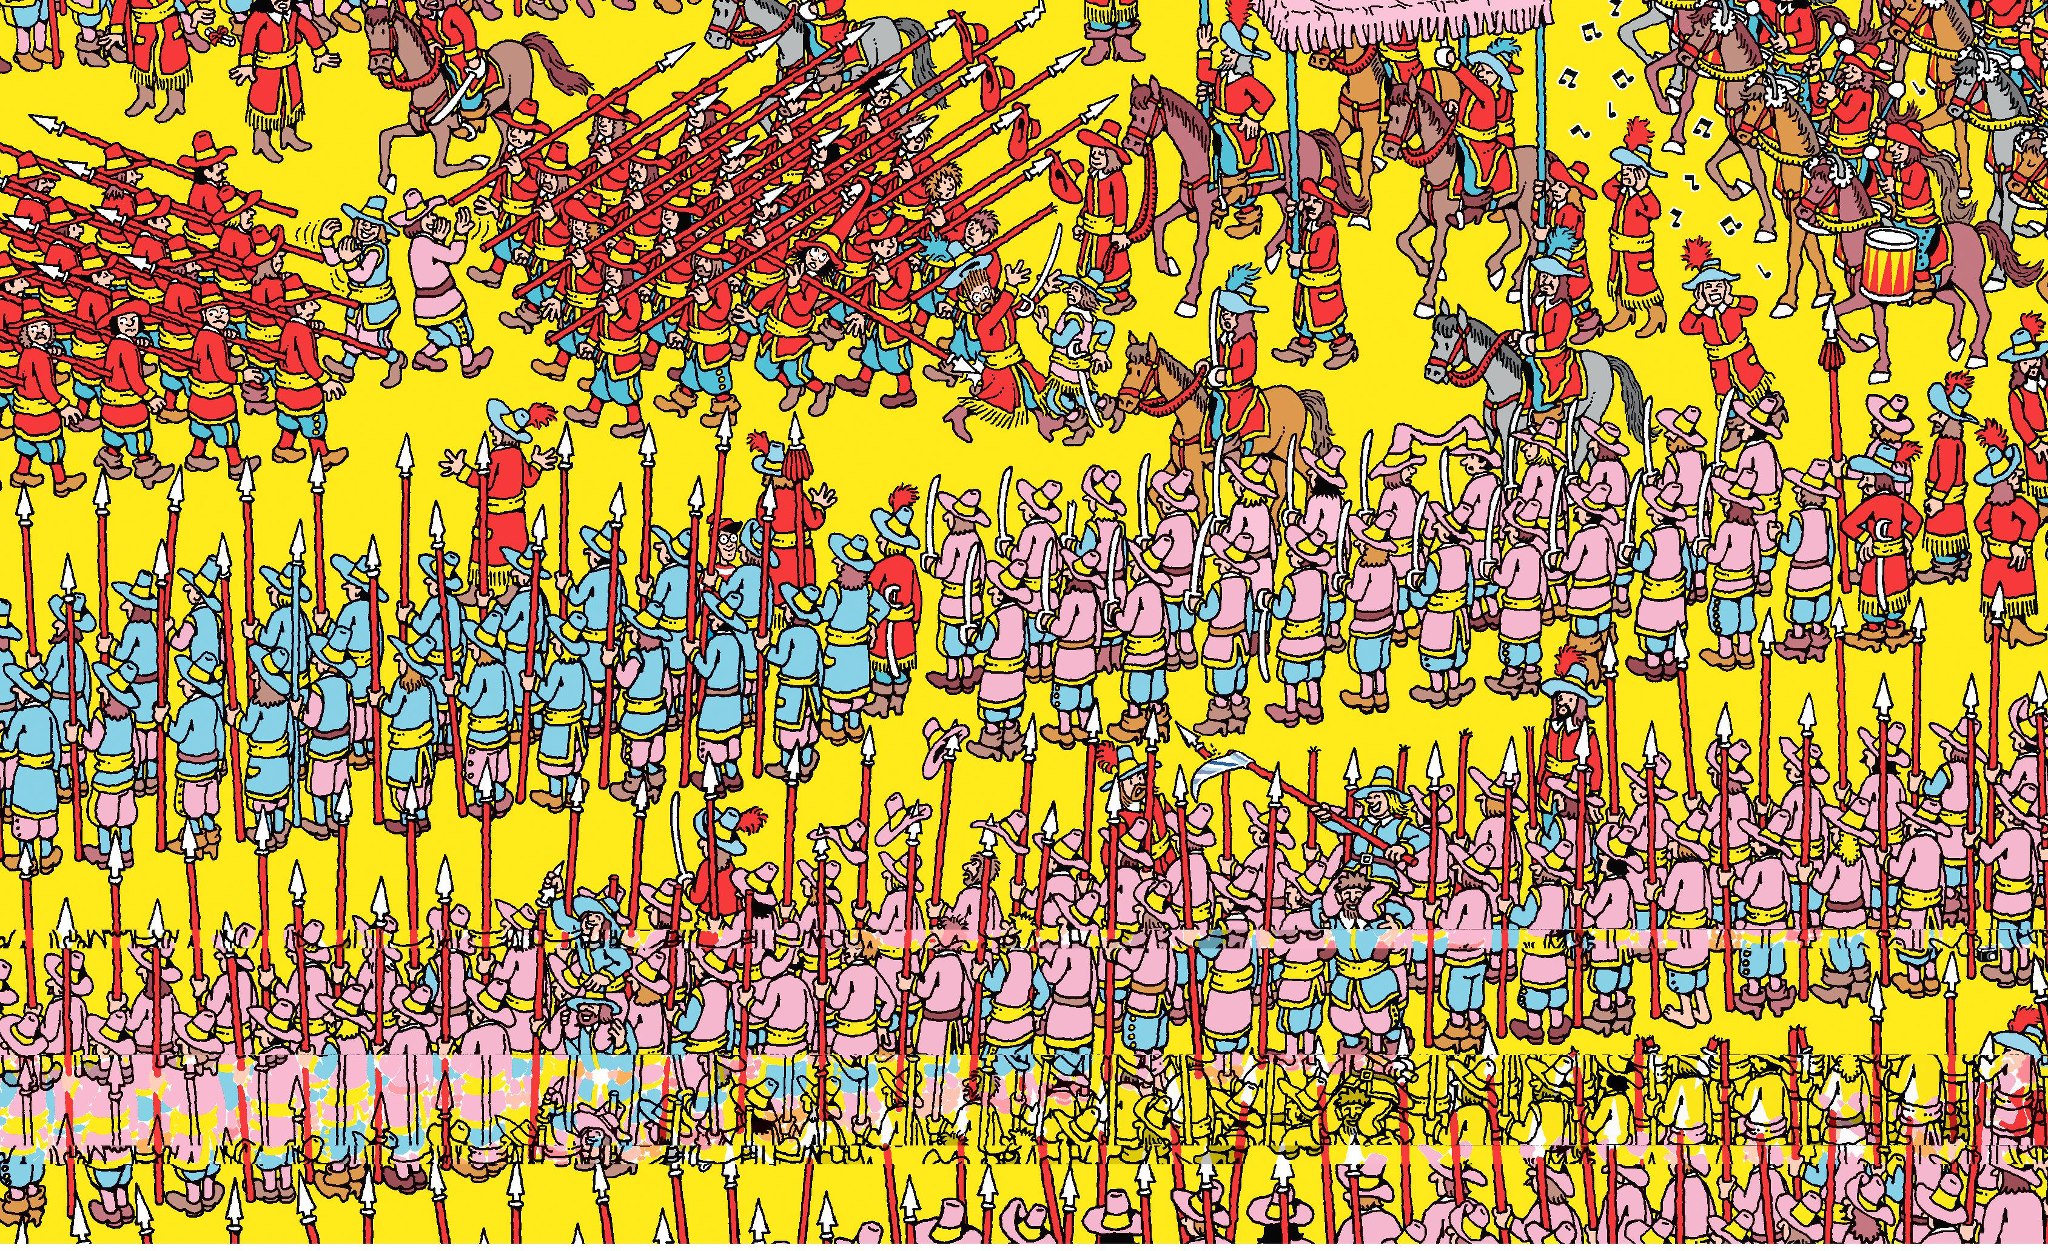 Free Download About Wheres Waldo All About The Life Of Waldo 2048x1251 For Your Desktop Mobile Tablet Explore 48 Where S My Wallpaper Free Wallpaper Backgrounds Free Wallpapers For Desktop